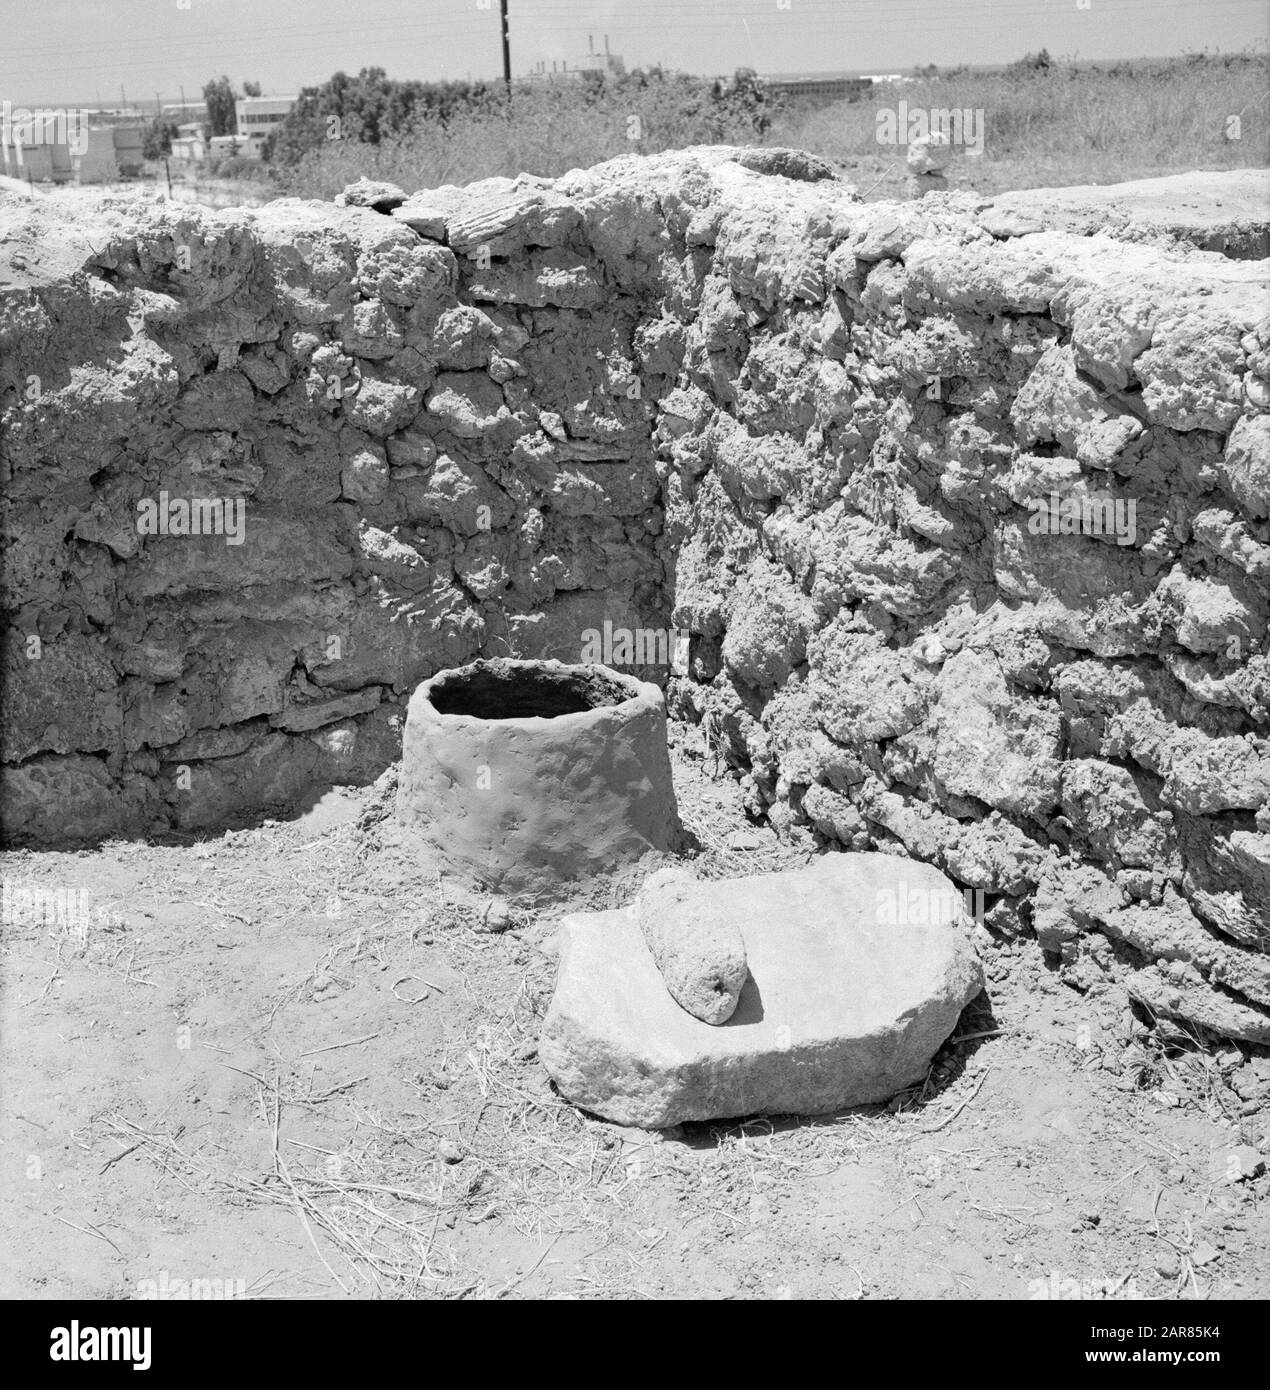 Israel - Quasileh  Quasileh. Archaeological remains on the Napoleon Hill Date: 1 January 1963 Location: Israel, Quasileh Keywords: archeology, hills, landscapes, walls, excavations Personal name: Napoleon (emperor France) Stock Photo